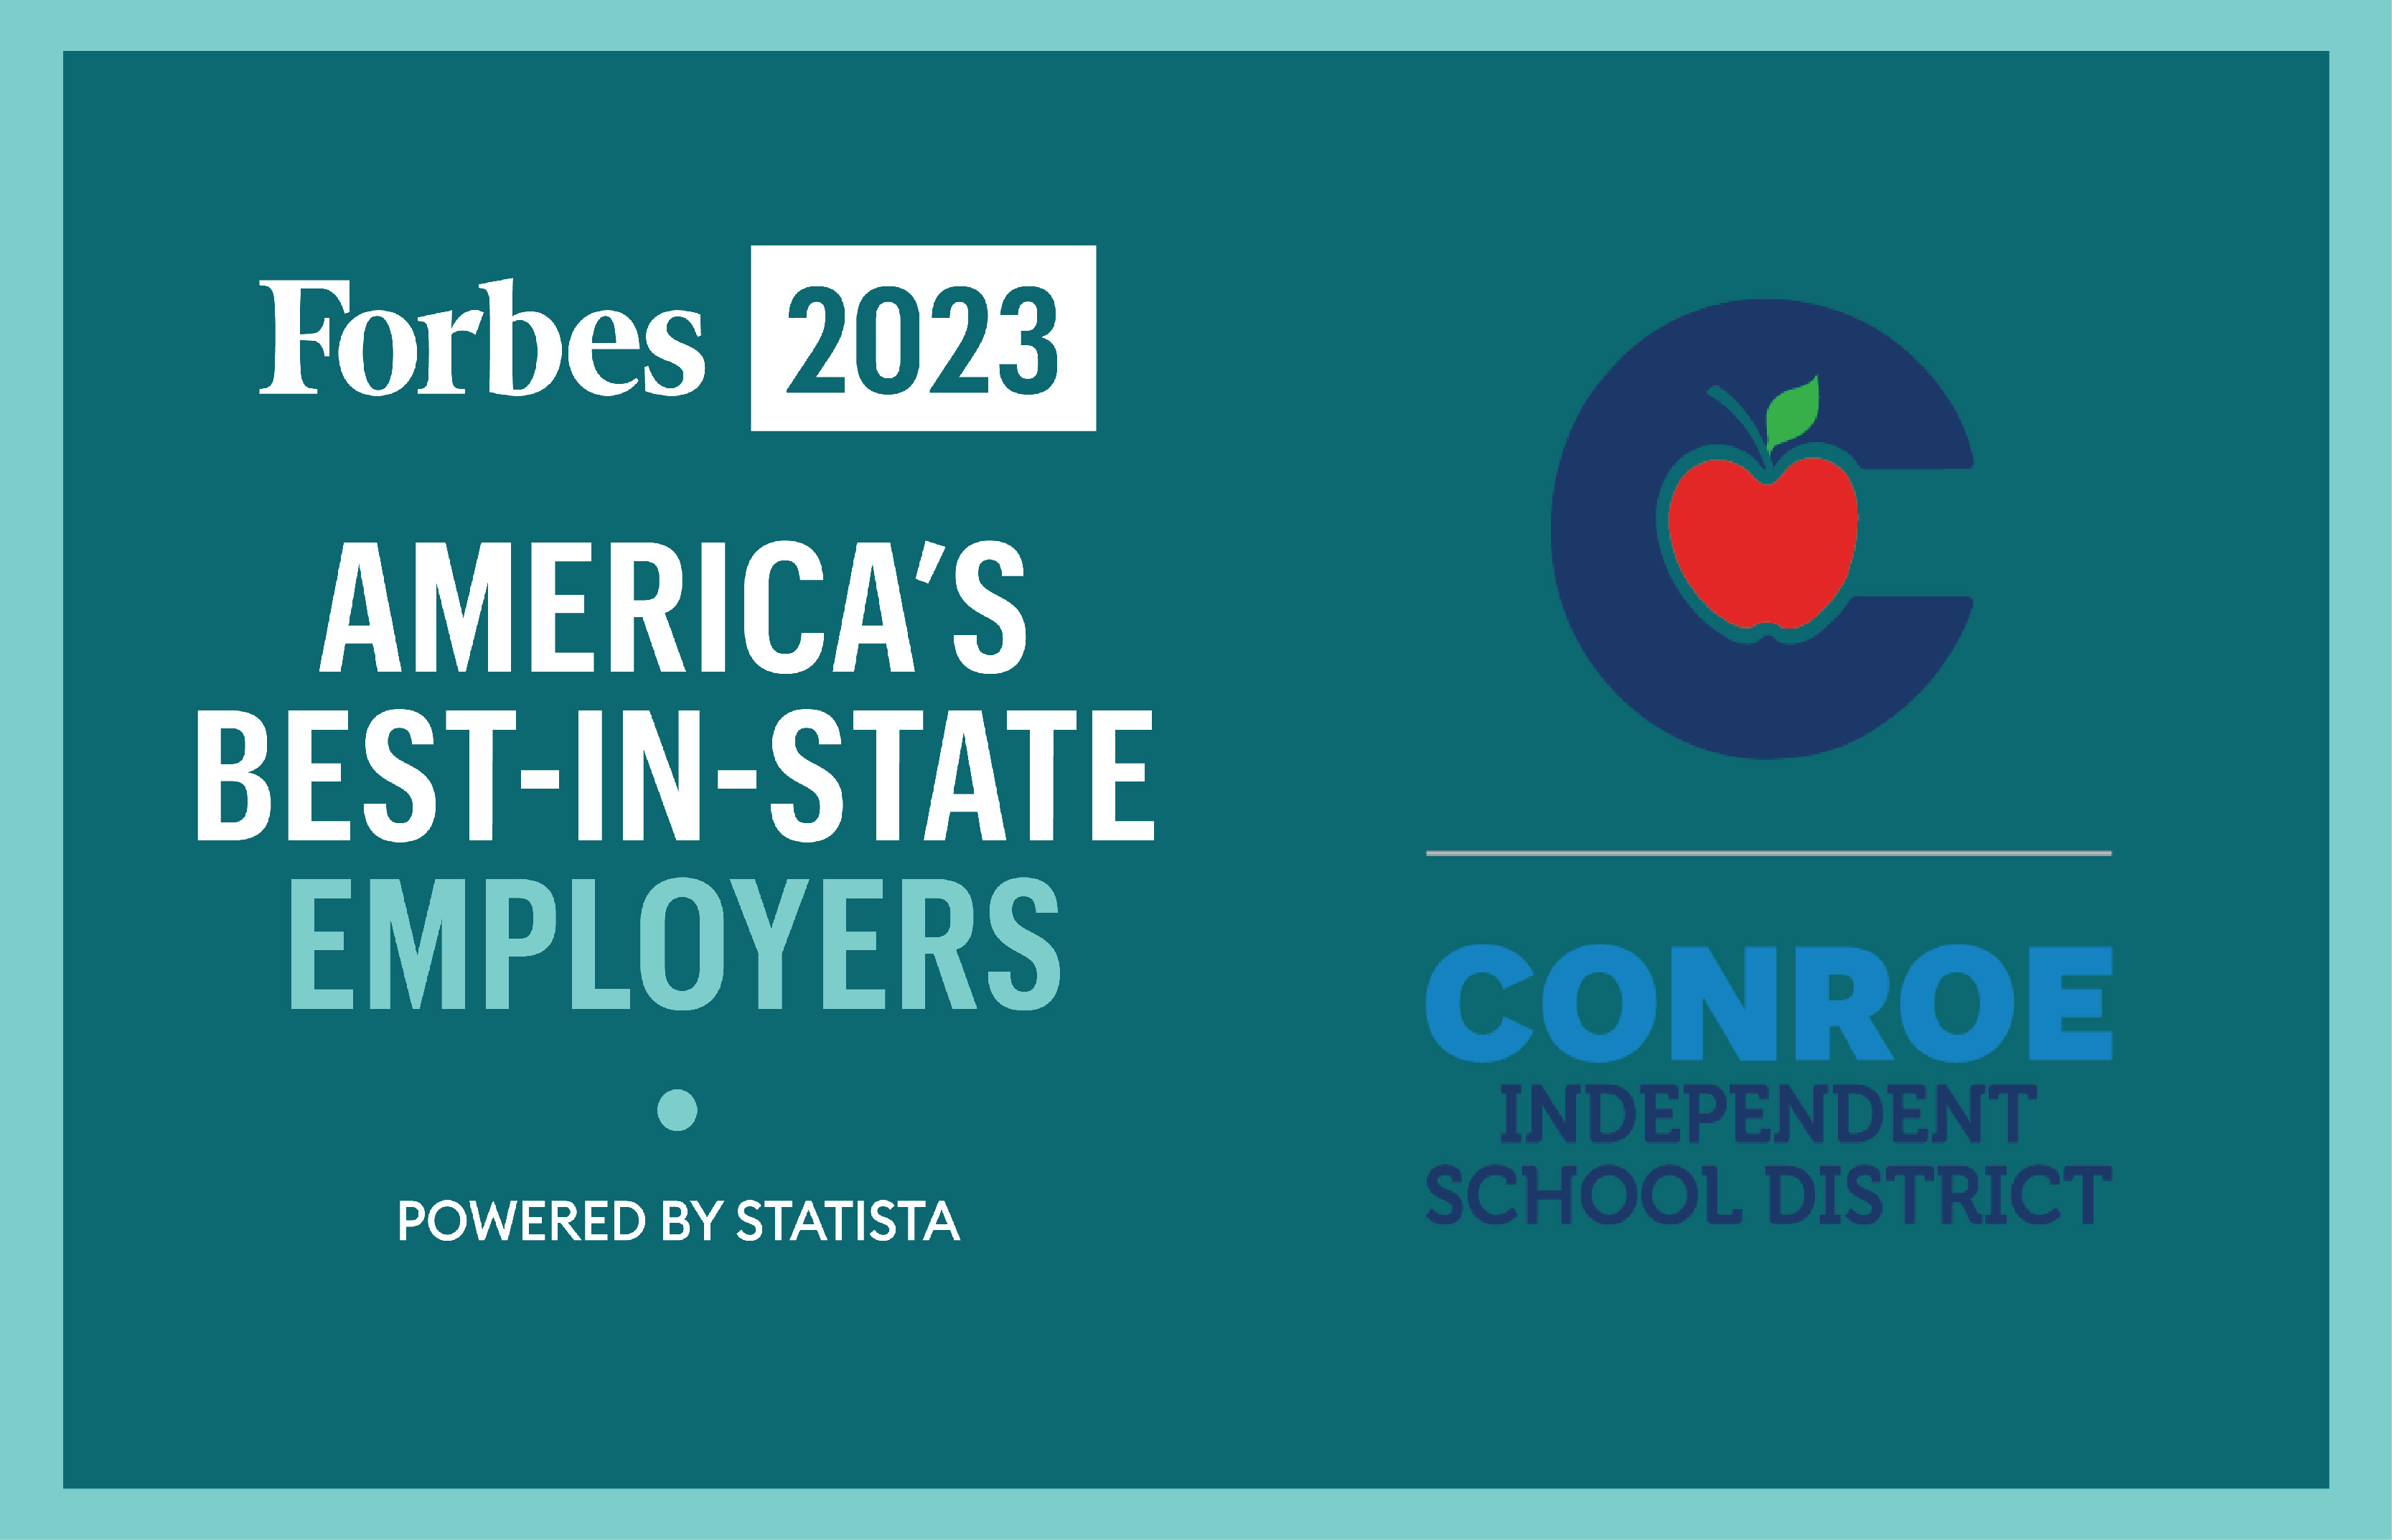 Conroe ISD Named Forbes 2023 Best-In-State Employers for Texas